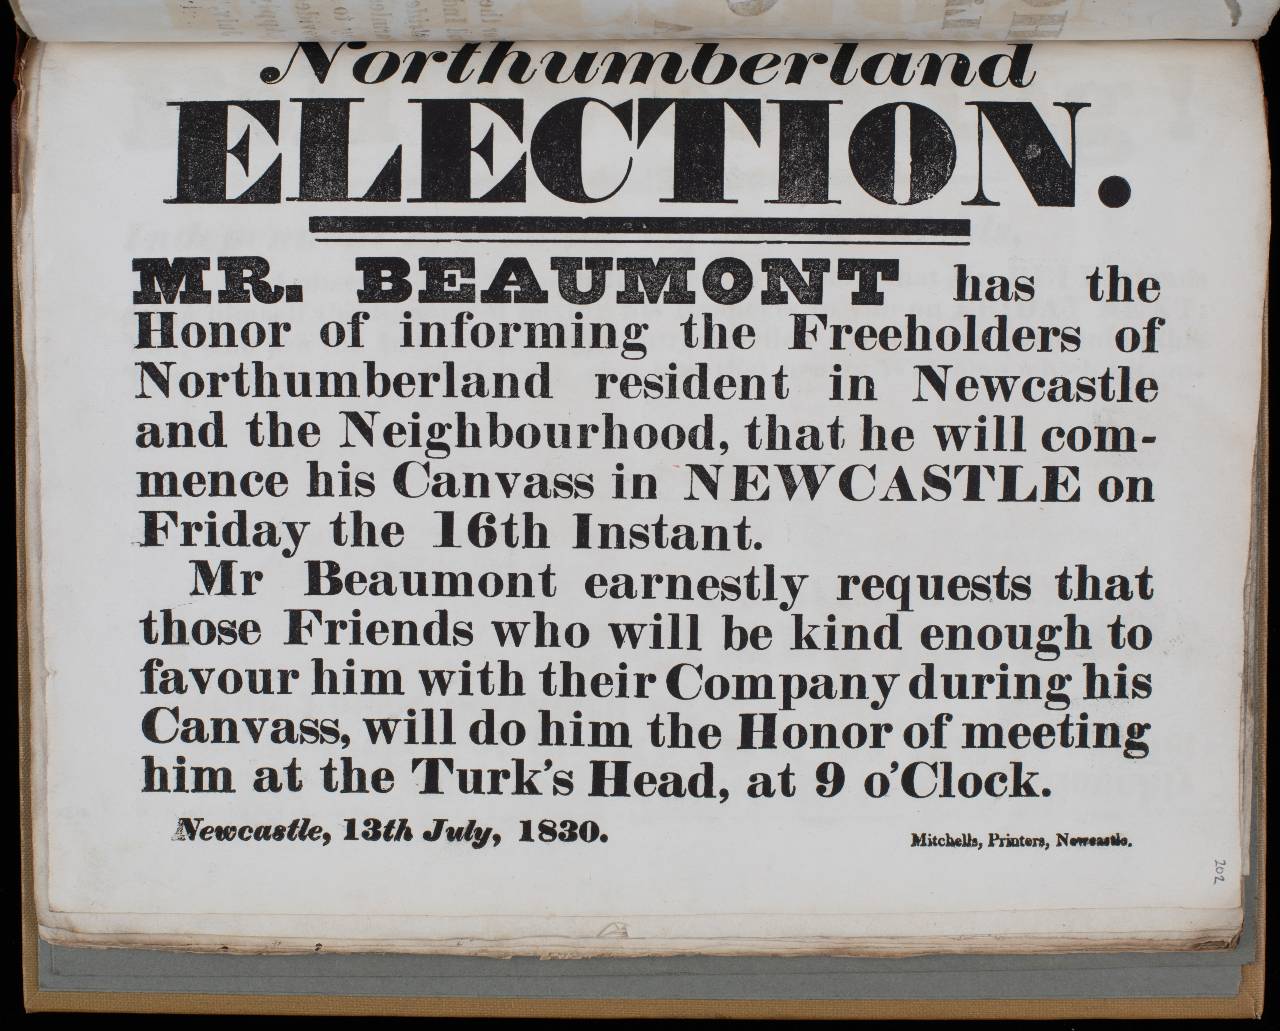 A page of an election leaflet from the 1830s.